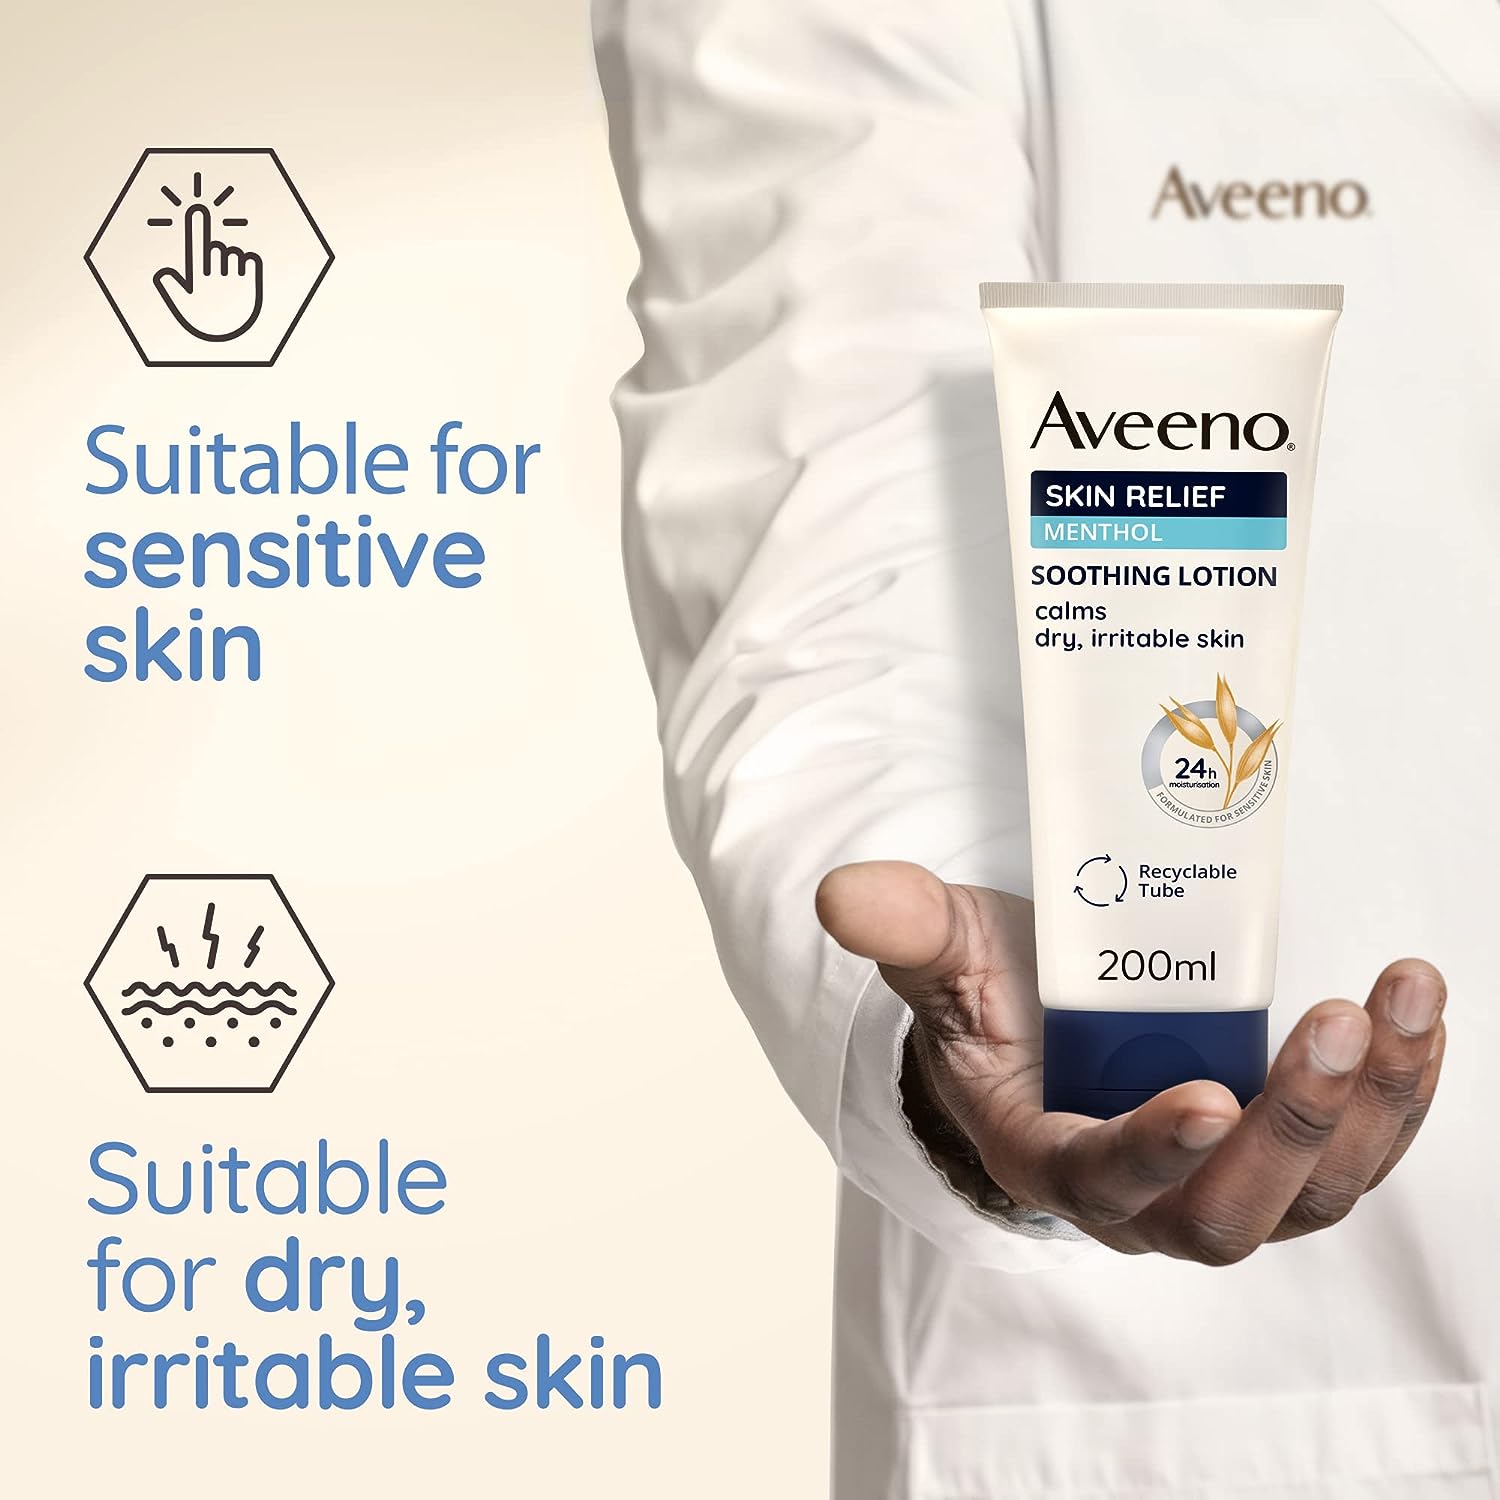 Aveeno, Skin Relief, Soothing Menthol Lotion, For Dry Sensitive & Irritable Skin, Shea Butter, 200ml